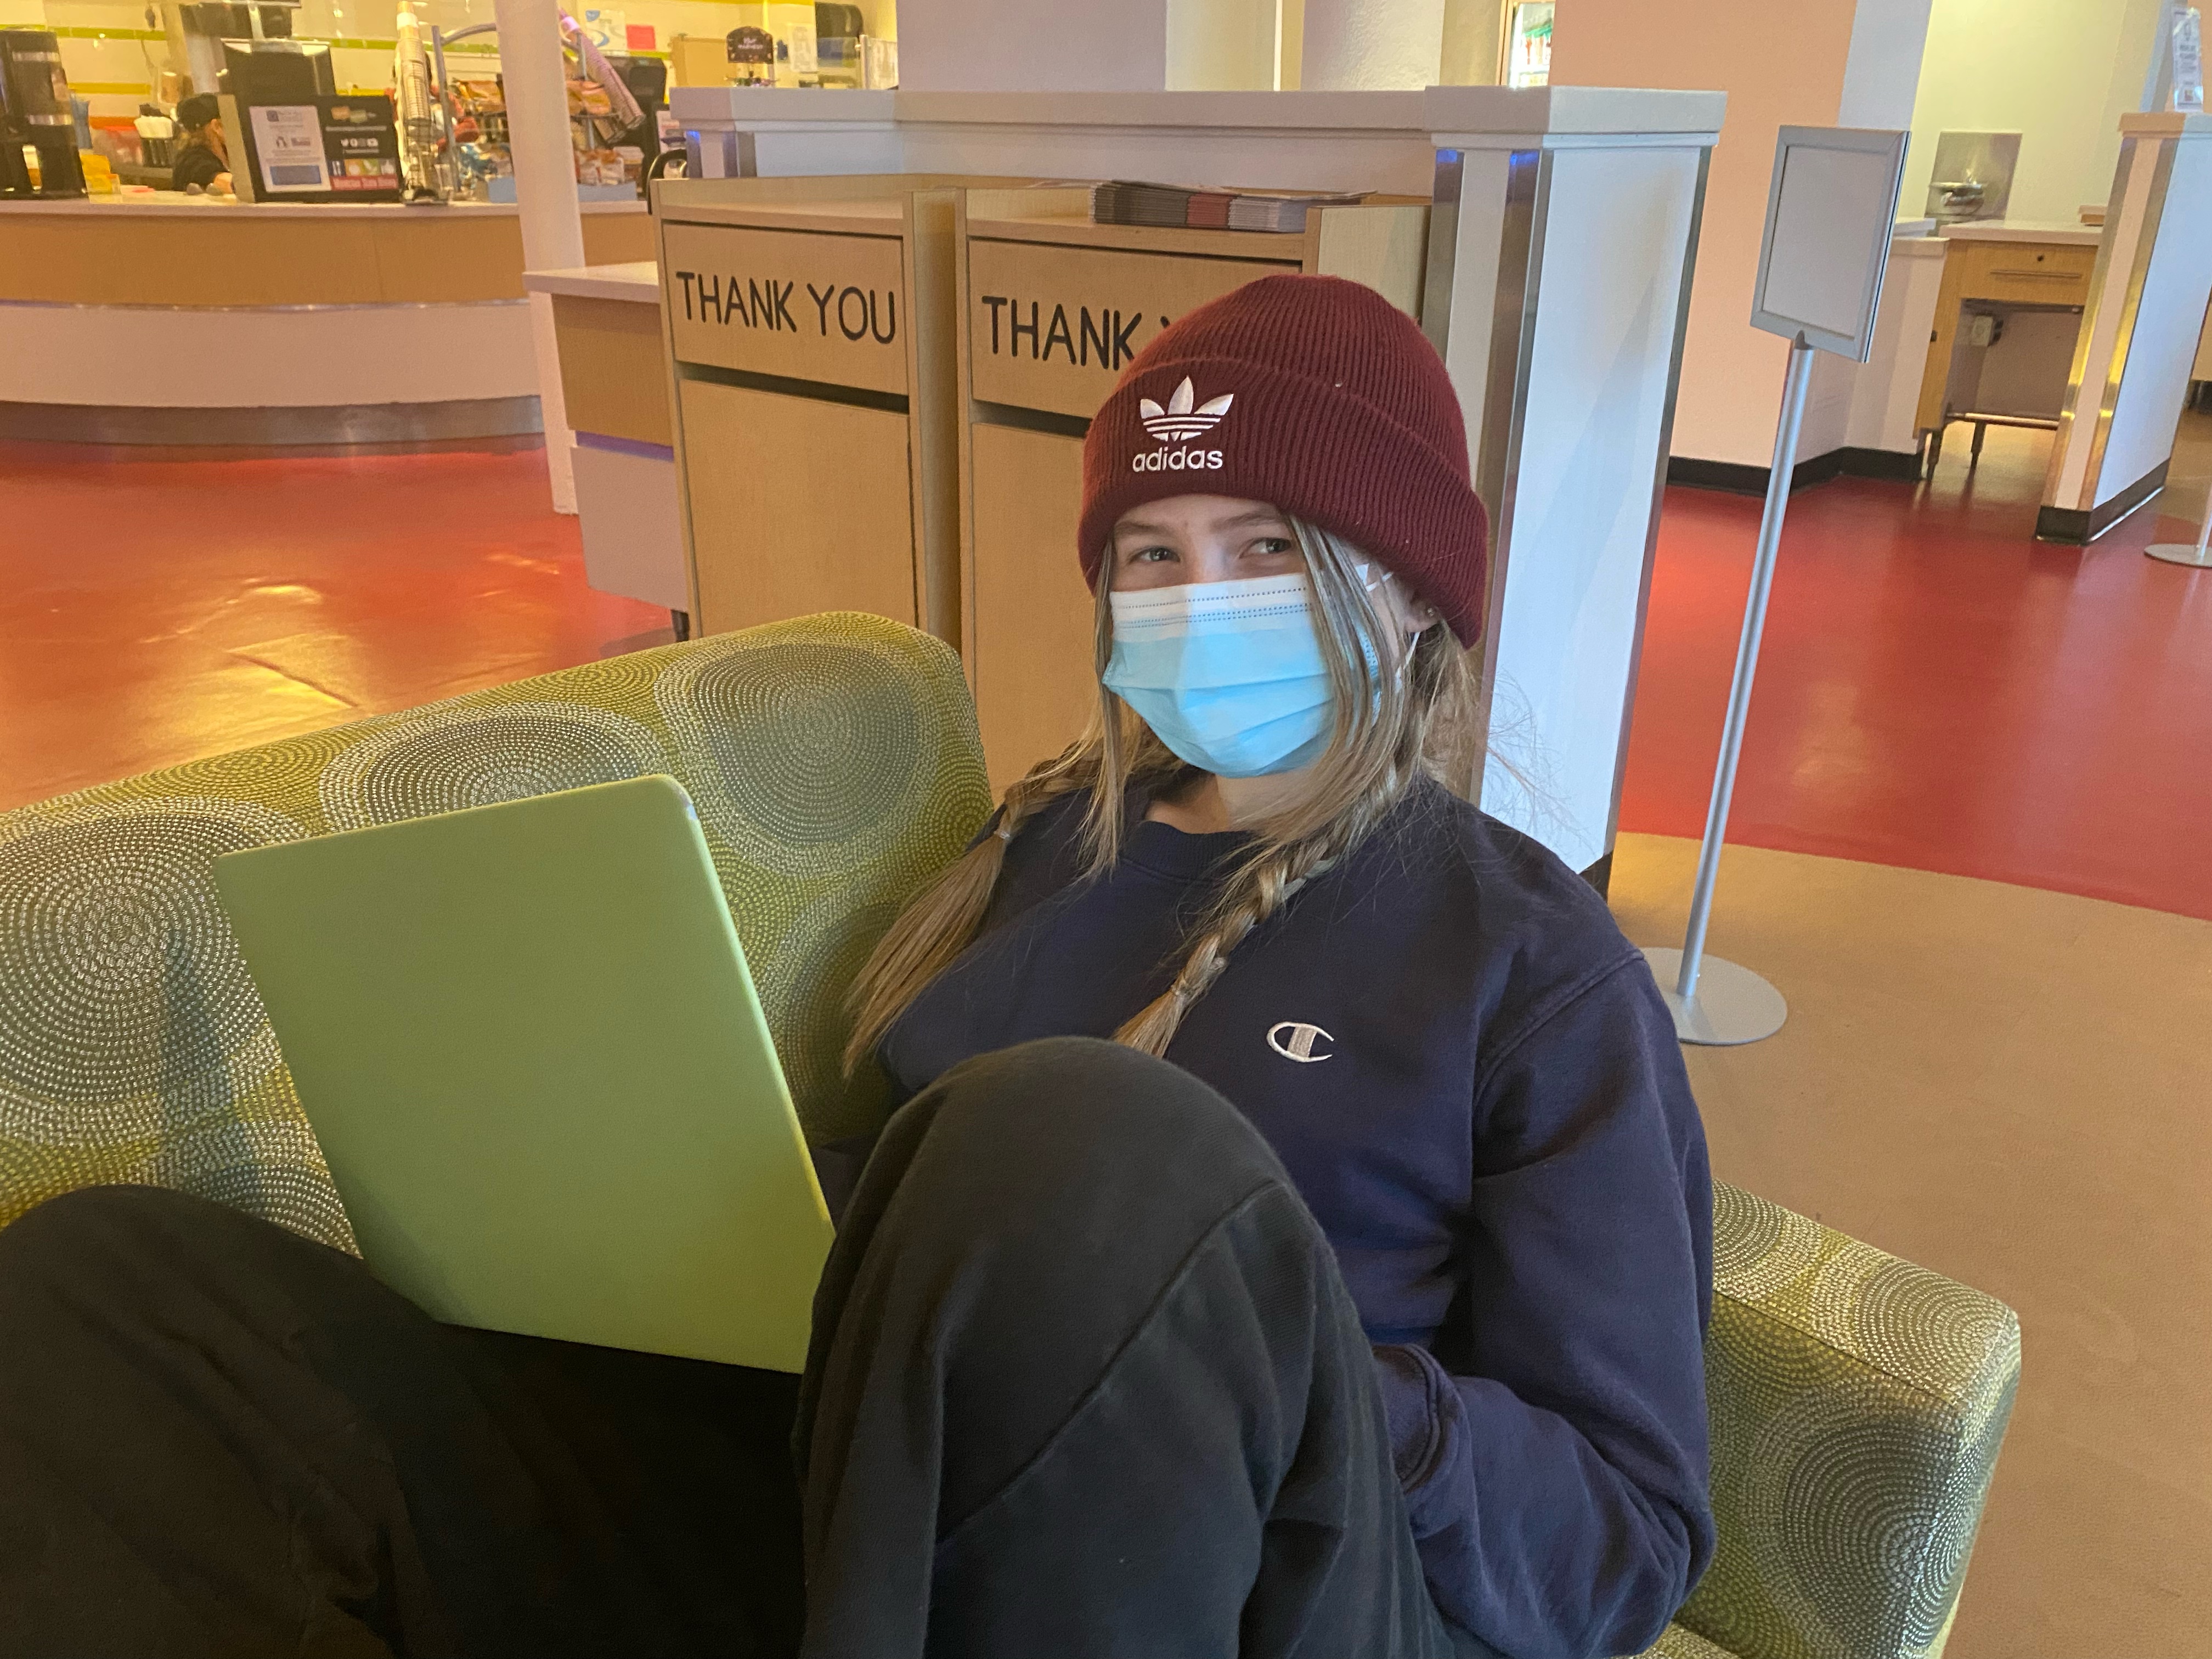 Although Emma Rowe, a freshman psychology major, was not a student at Montclair State last year, she understands why the university would charge for winter housing. Sam Nungesser | The Montclarion